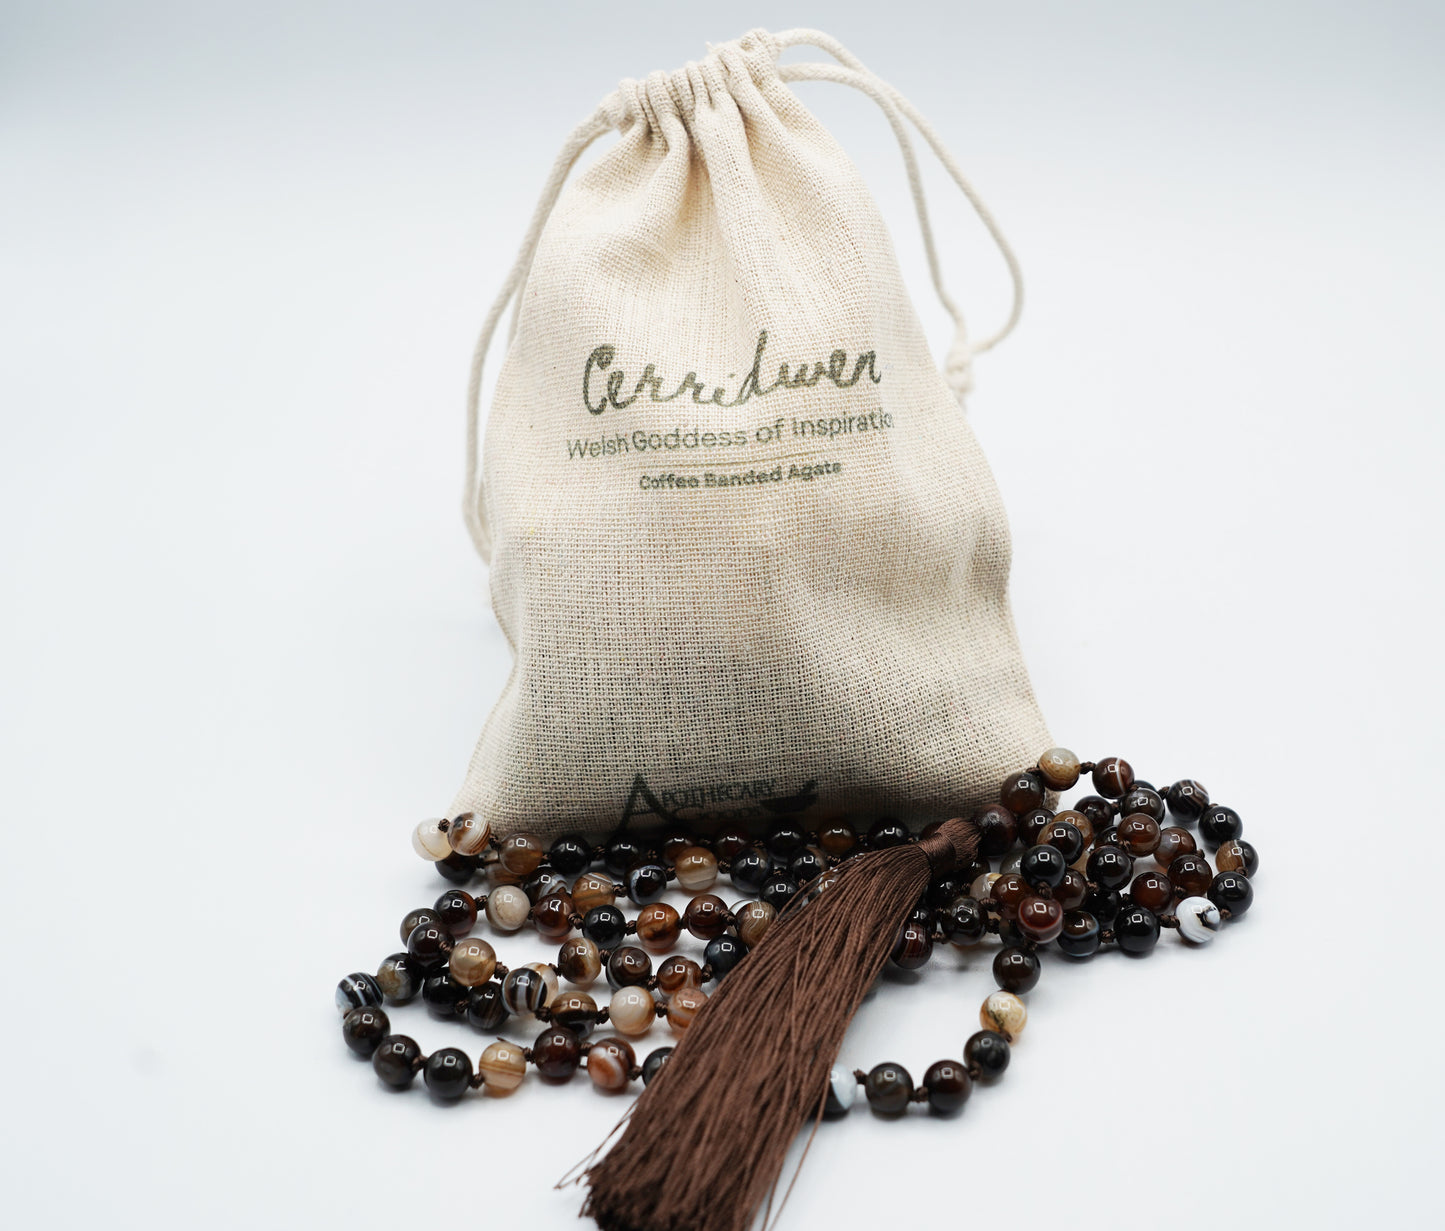 Cerridwen's Powerful Energy - Mala DARK Goddess Intention Beads of Coffee Banded Agate